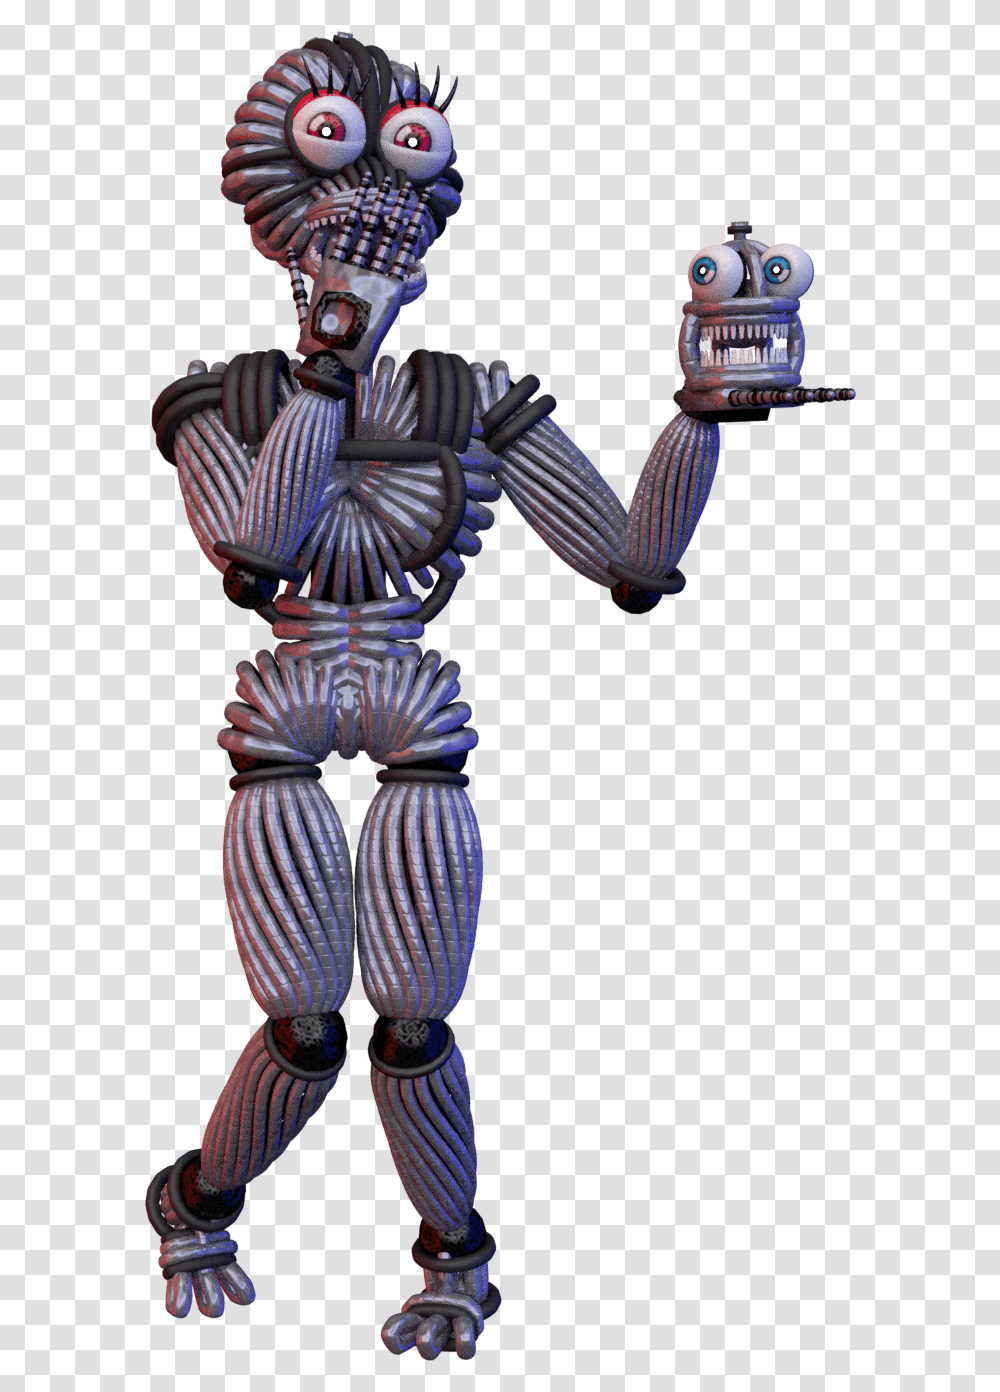 Fnaf Funtime Chica Endo Download Fnaf Funtime Chica Endo, Architecture, Building, Pillar, Toy Transparent Png